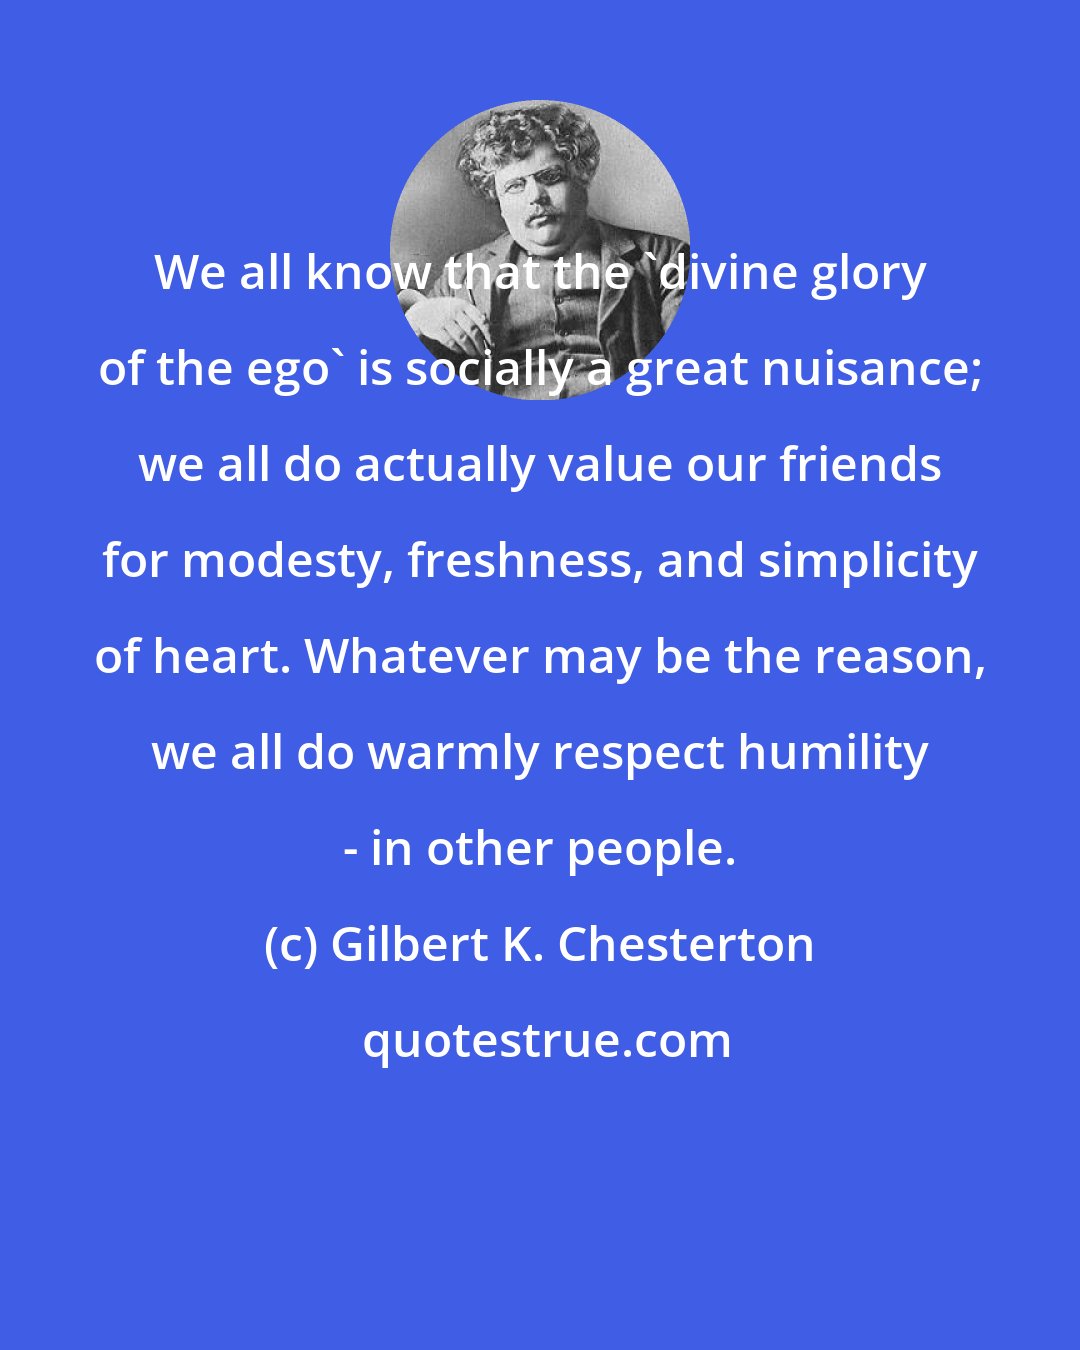 Gilbert K. Chesterton: We all know that the 'divine glory of the ego' is socially a great nuisance; we all do actually value our friends for modesty, freshness, and simplicity of heart. Whatever may be the reason, we all do warmly respect humility - in other people.